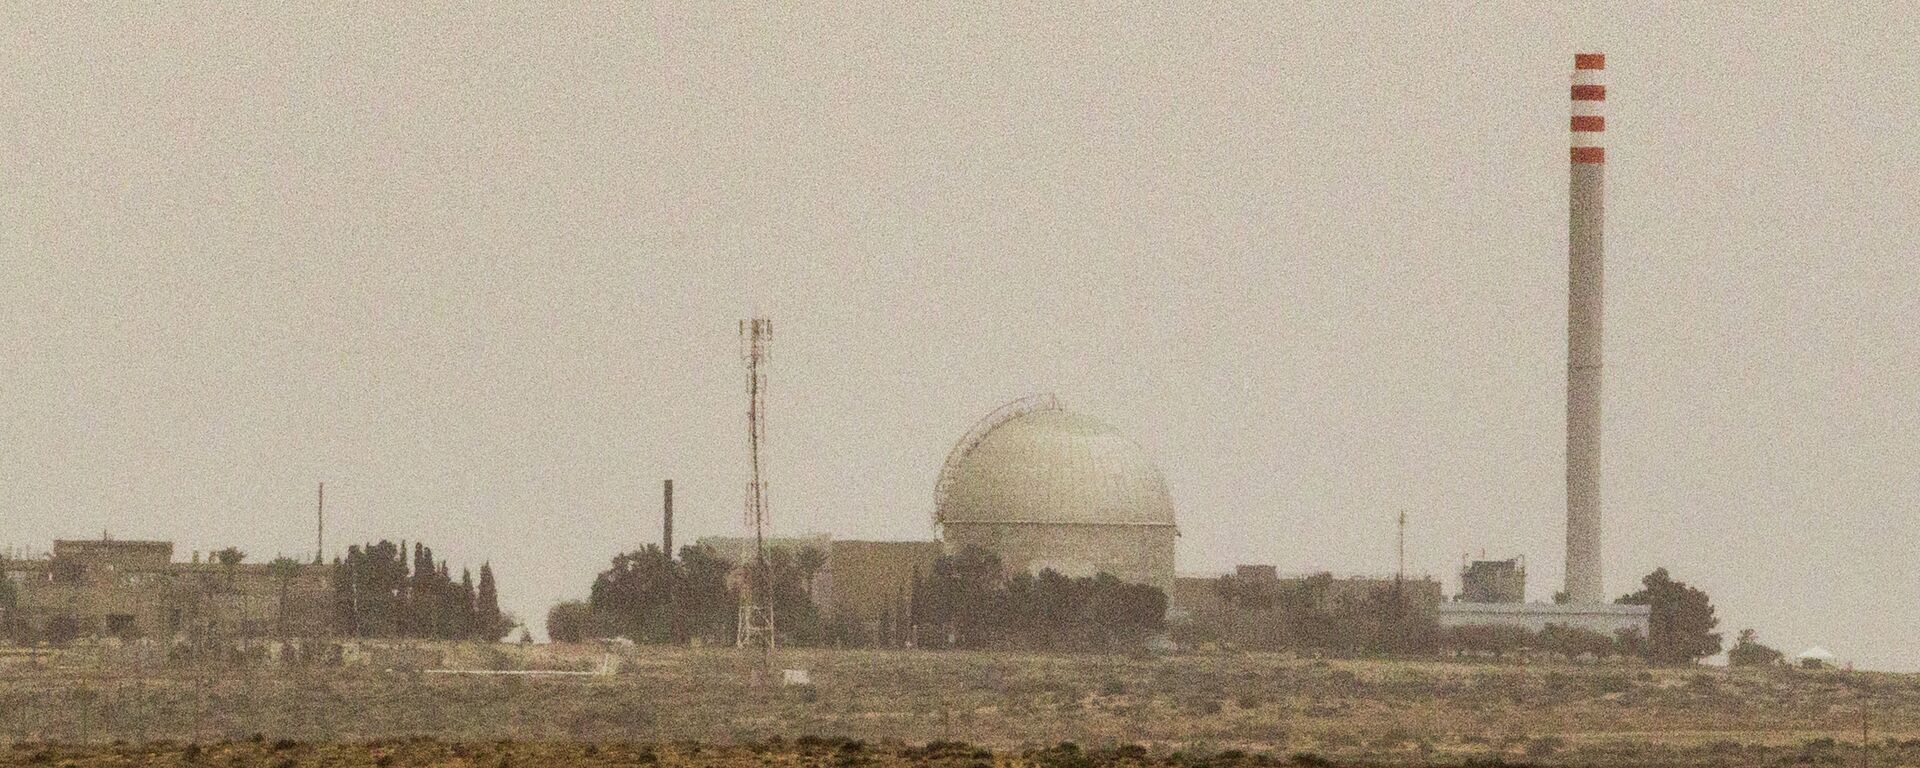 A picture taken on 8 March 2014 shows a partial view of the Dimona nuclear power plant in the Negev desert in southern Israel - Sputnik International, 1920, 25.02.2021